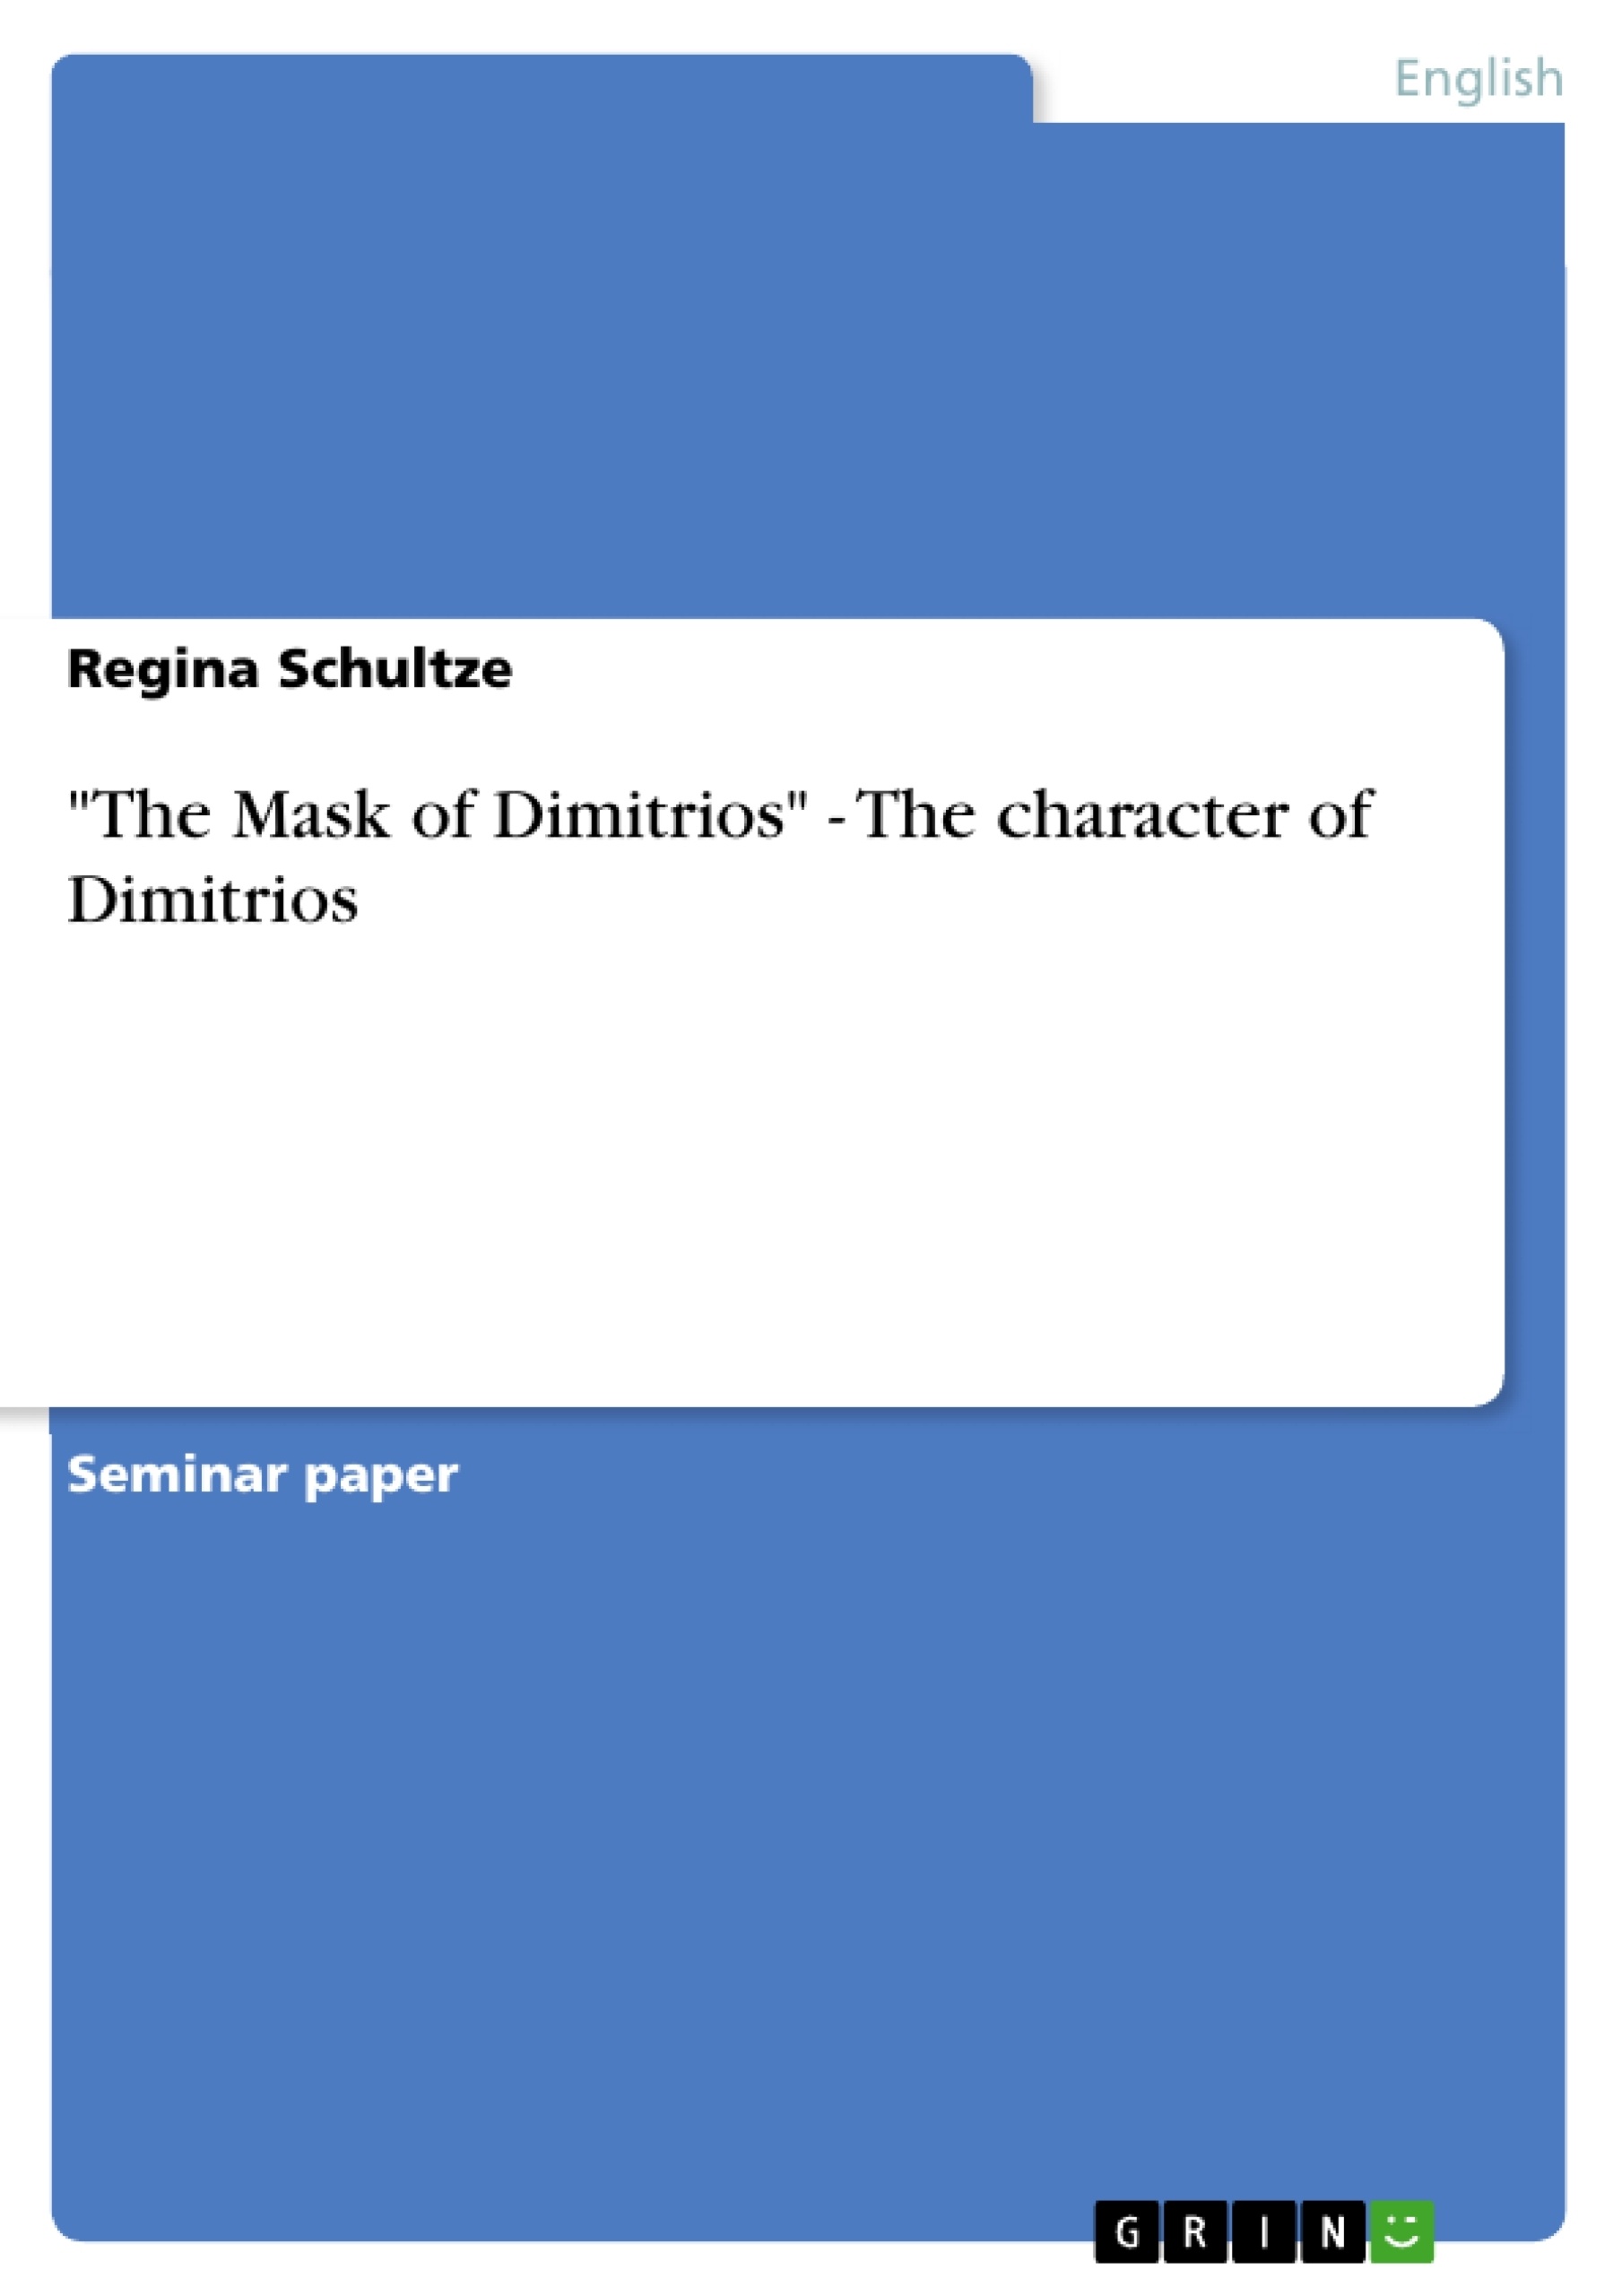 Title: "The Mask of Dimitrios" - The character of Dimitrios